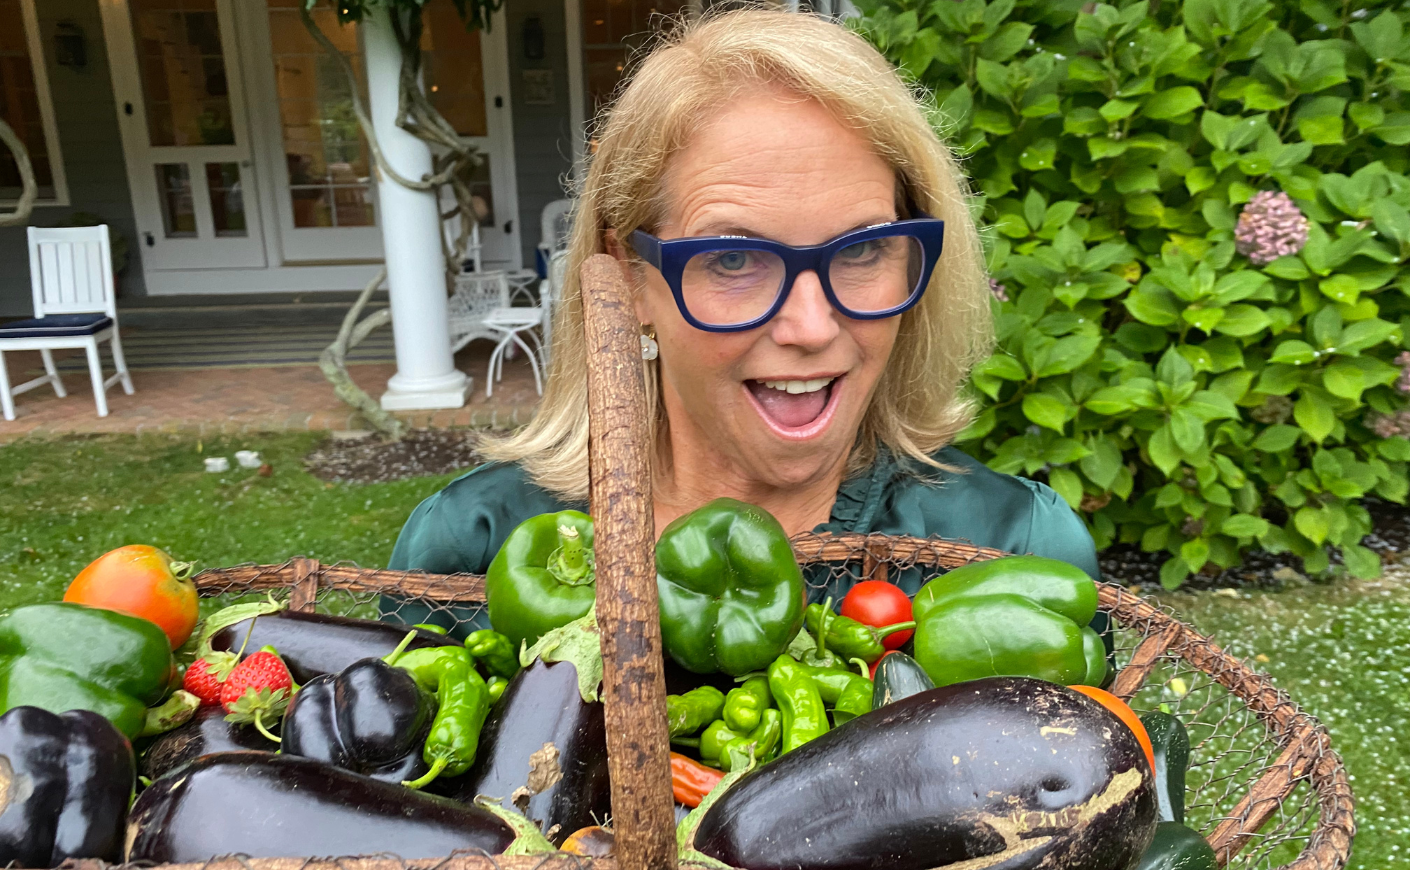 Katie Couric holding up eggplant, peppers, and other veggies in a basket